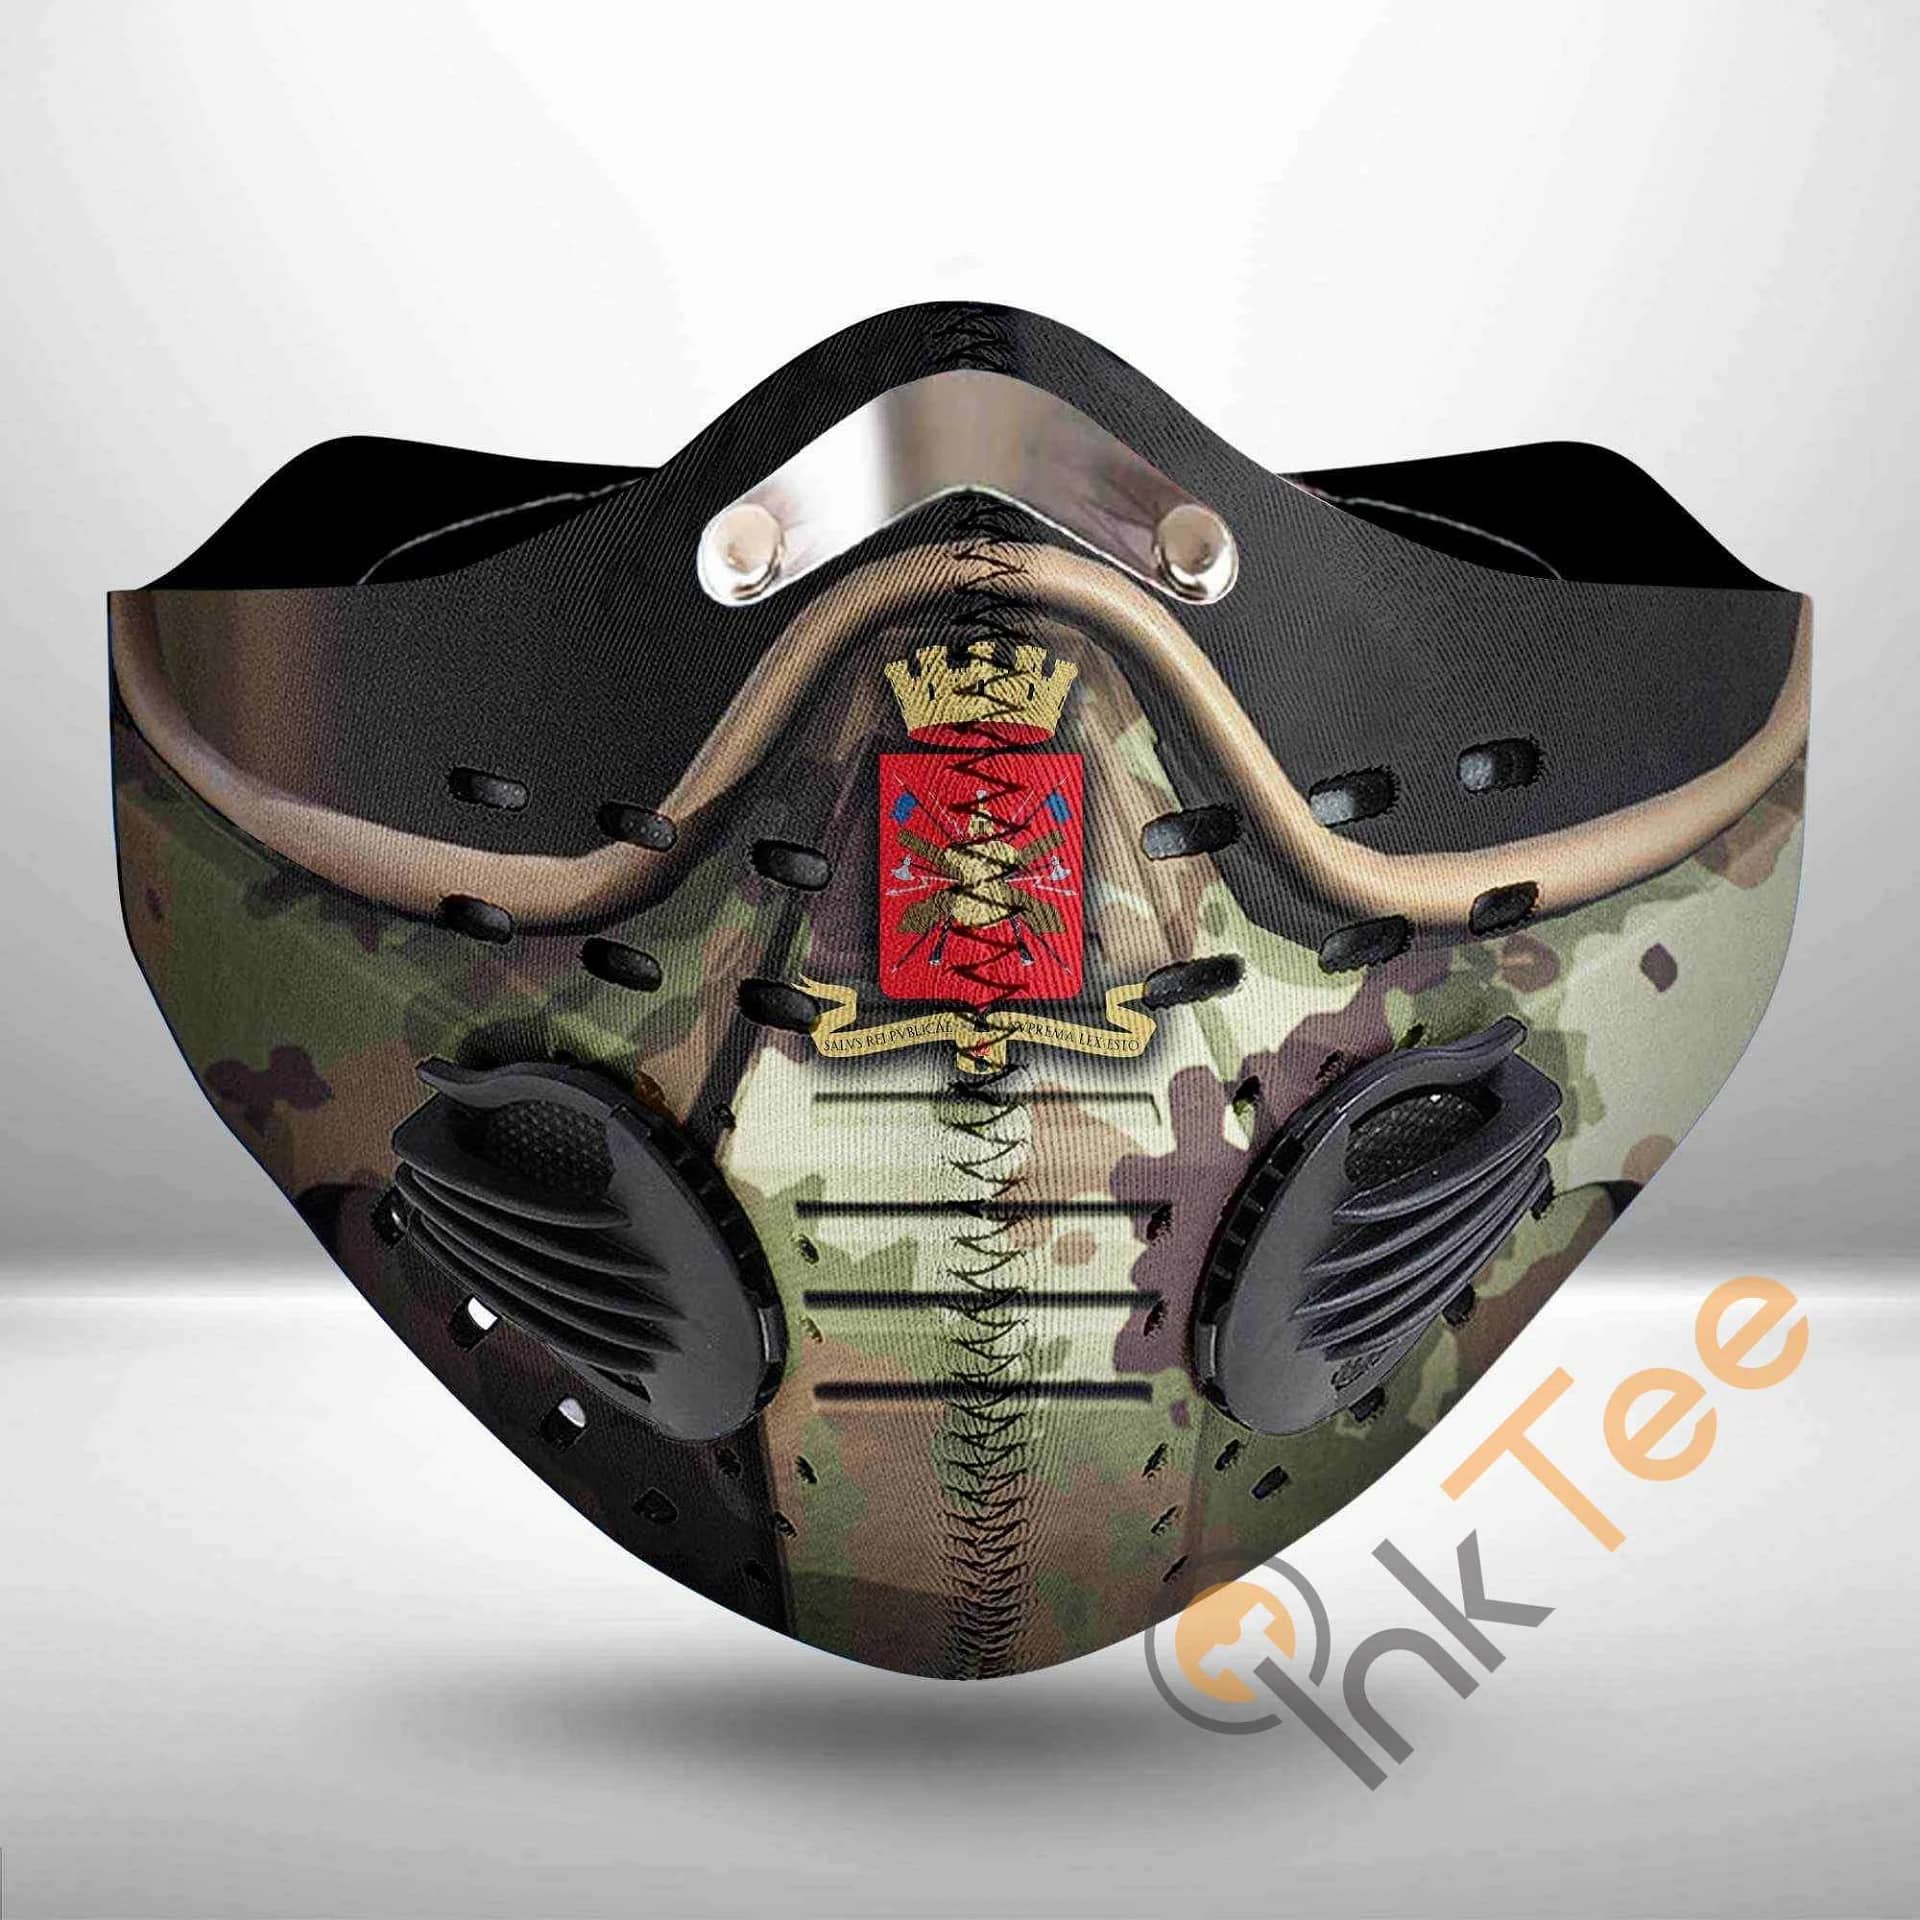 Italy Soldier Armor Scifi Fantasy Filter Activated Carbon Pm 2.5 Face Mask